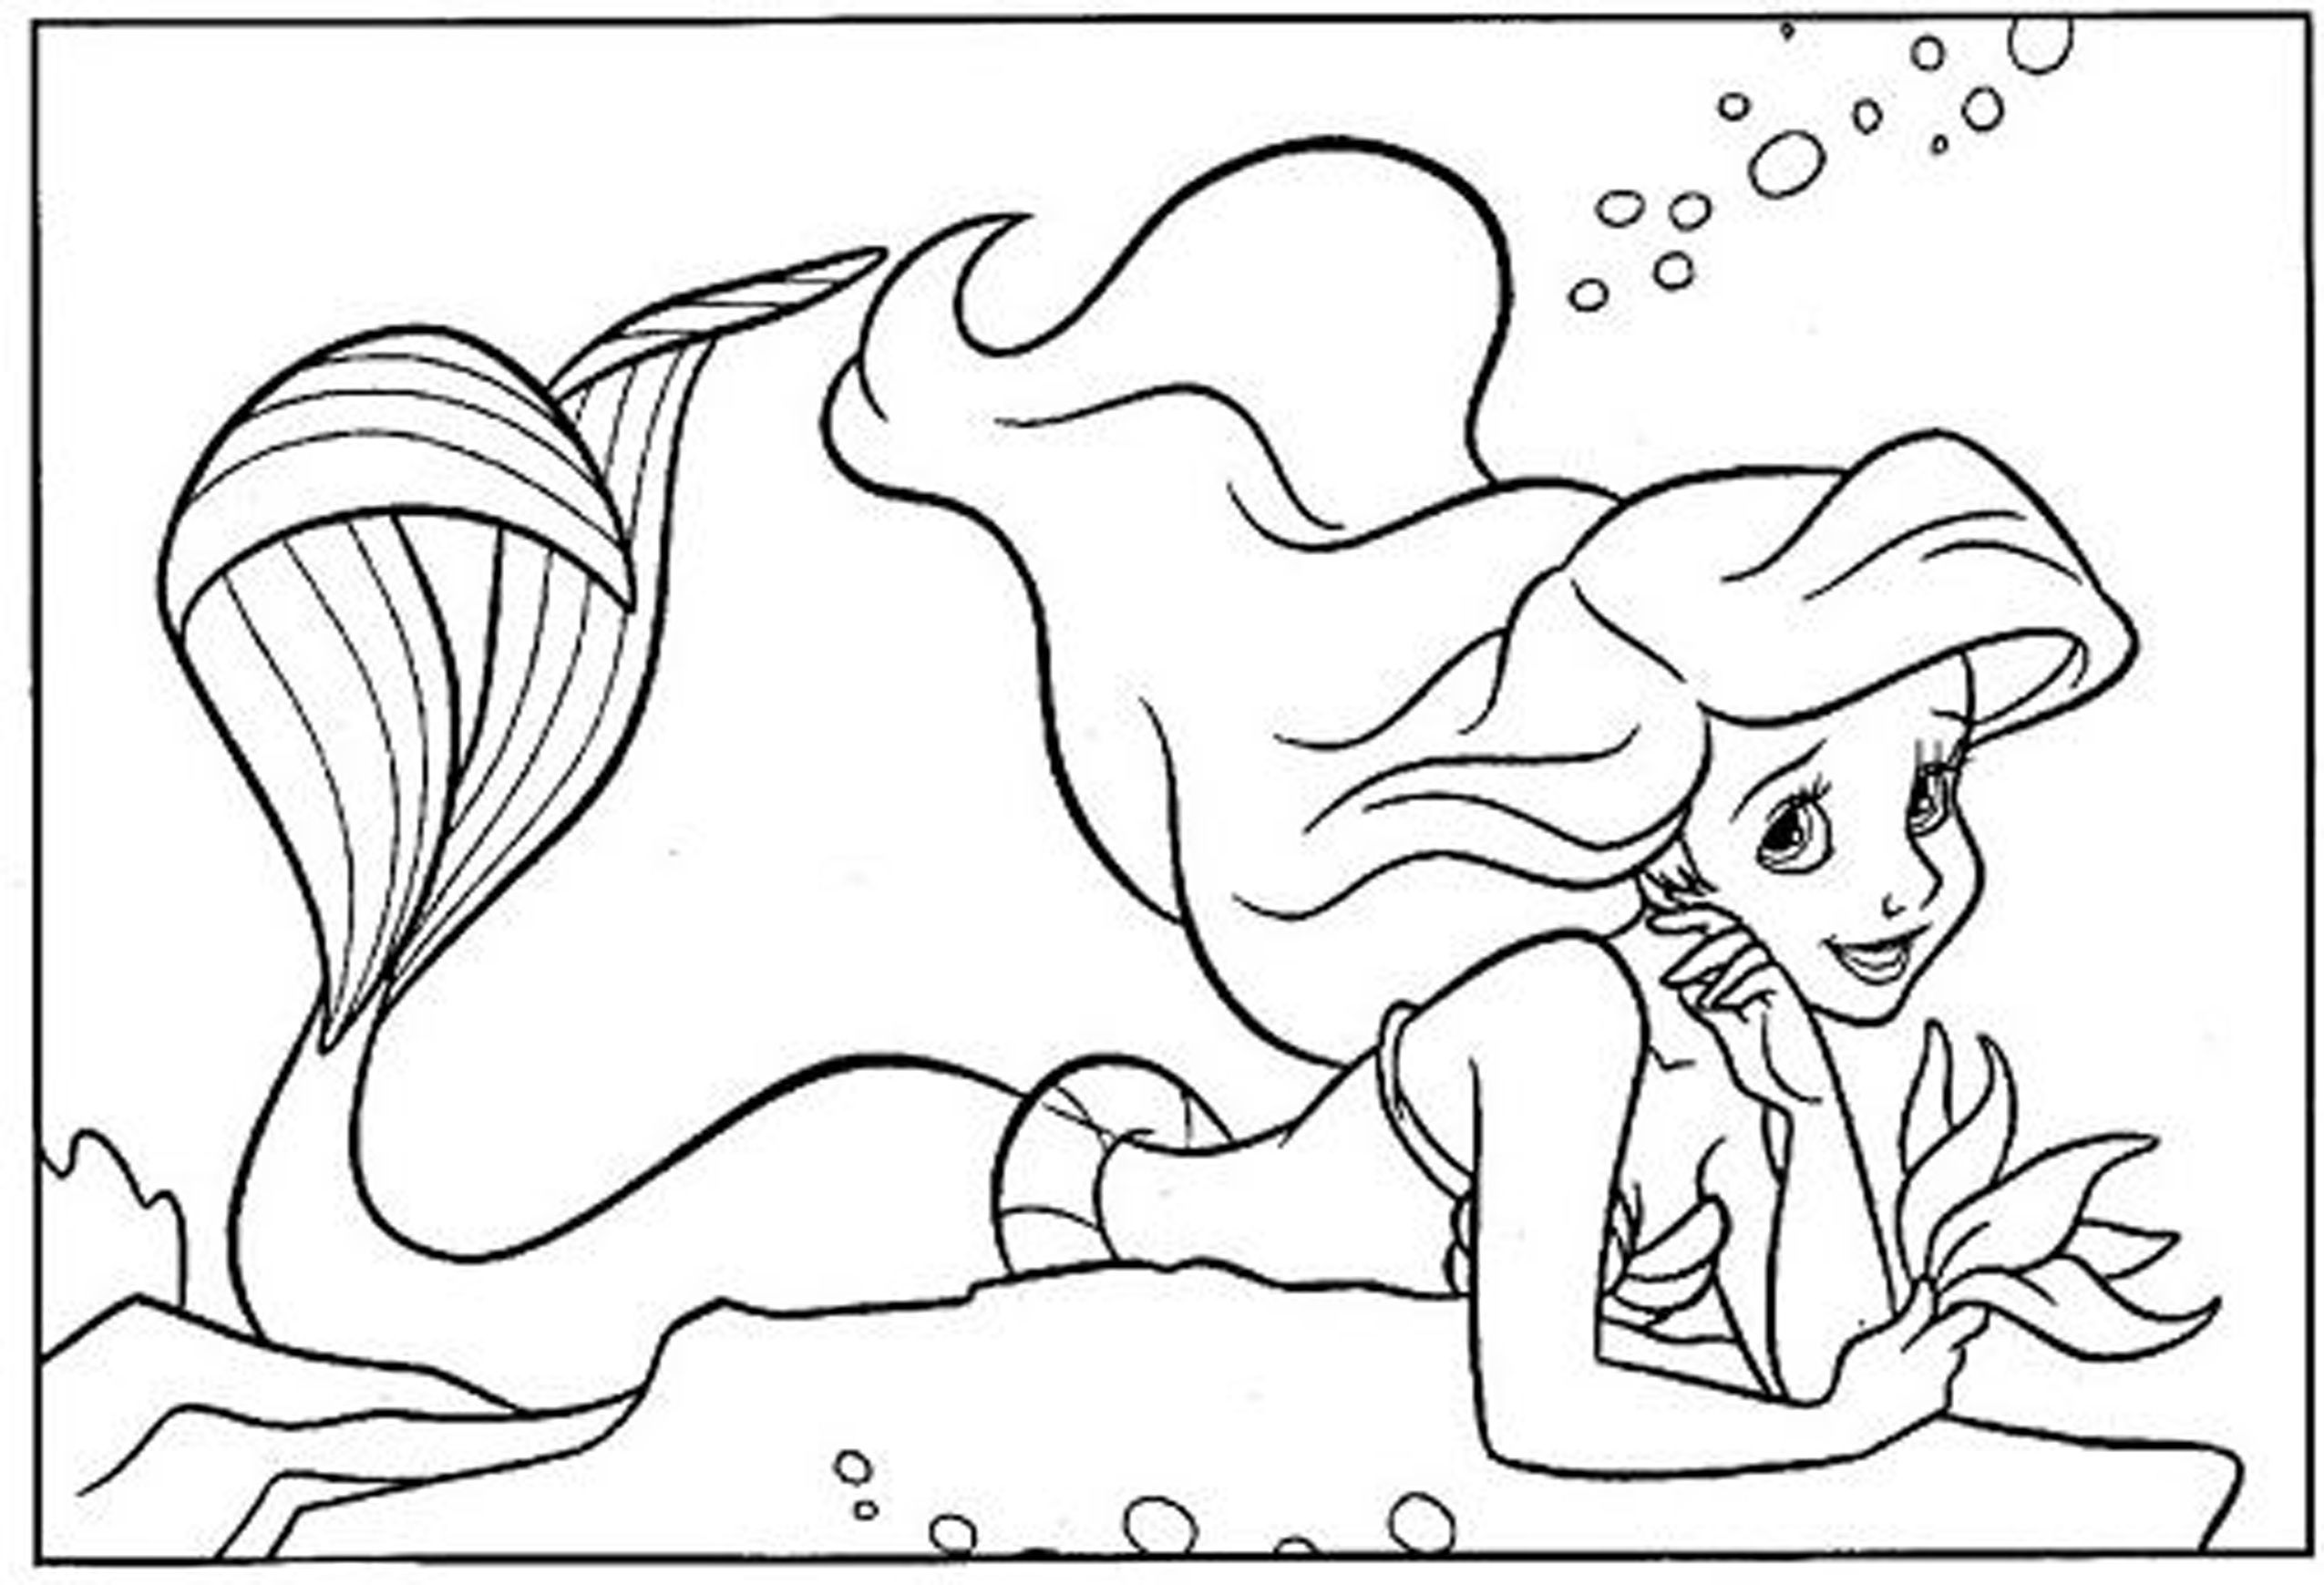 Little Mermaid Coloring Pages For Girls 10 And Up - VoteForVerde.com